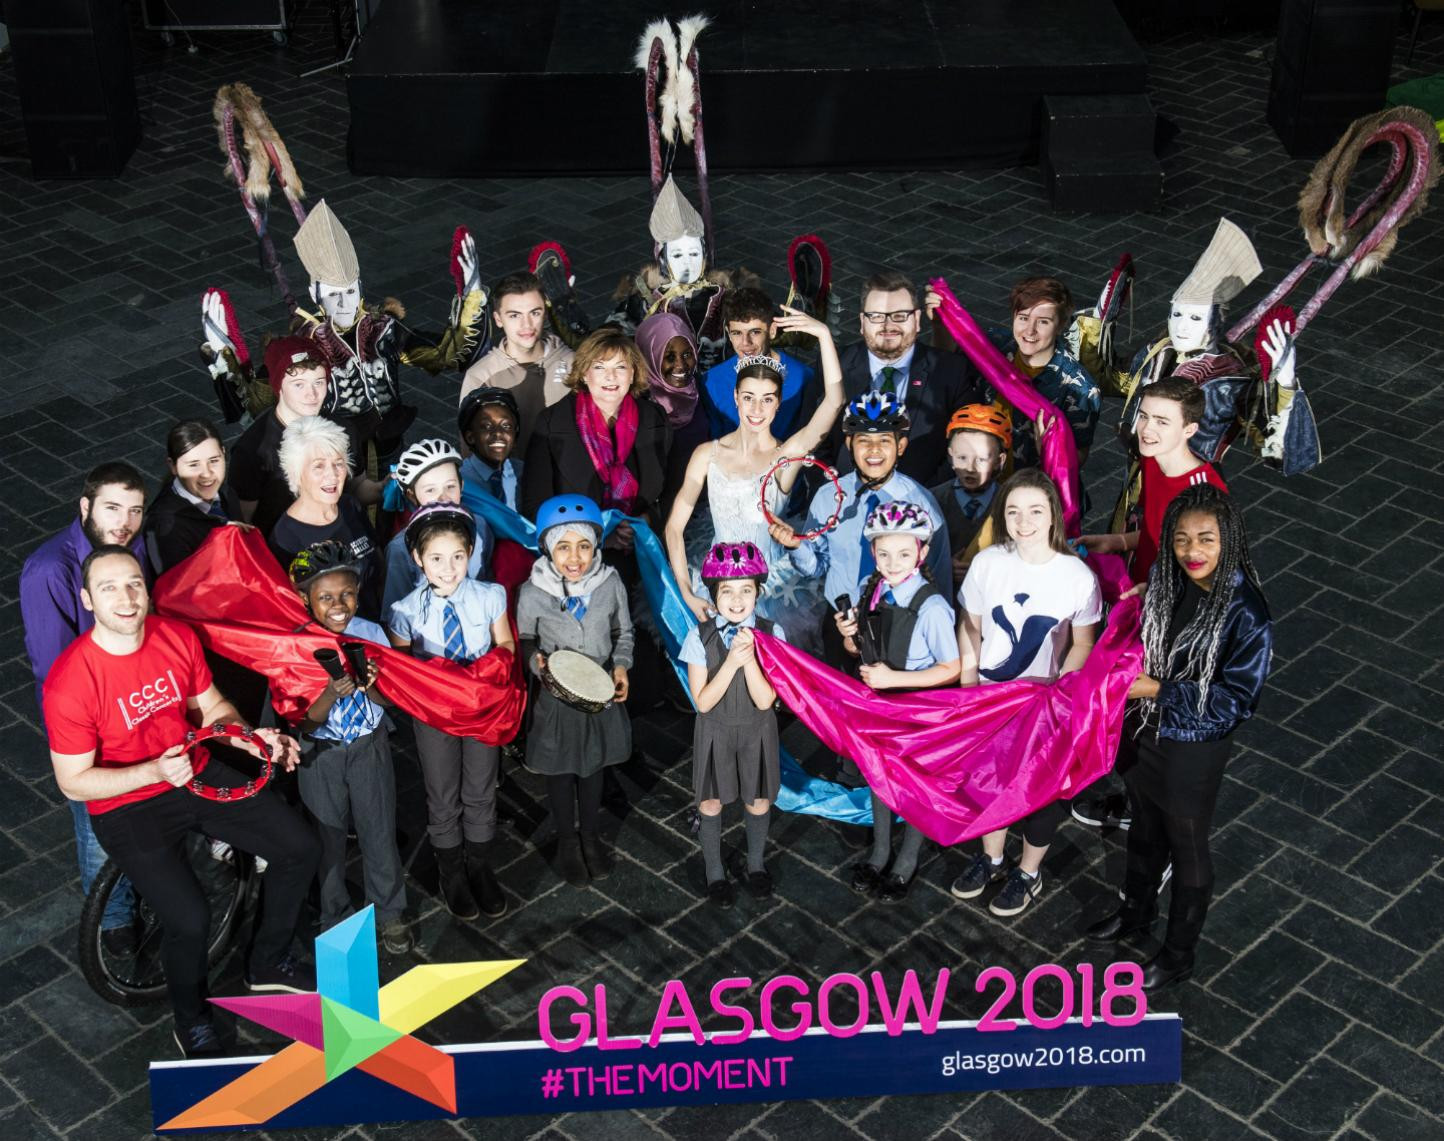 Glasgow 2018 to invest £750,000 in festival projects for European Championships